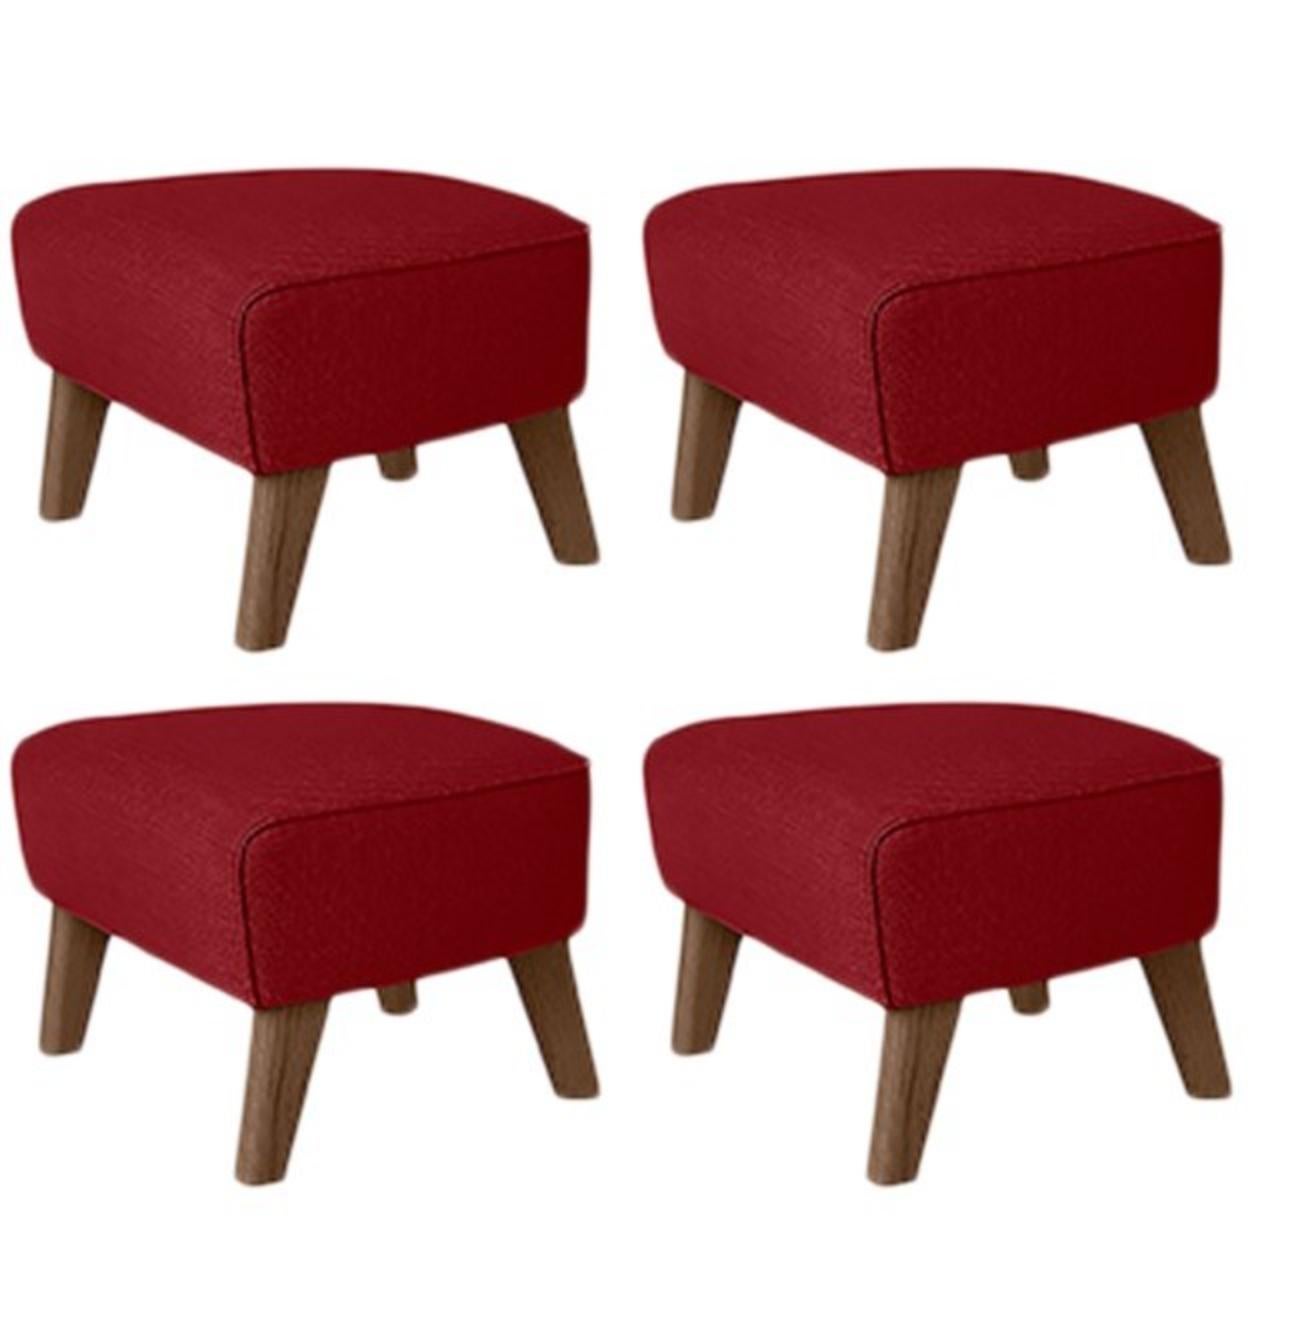 Set of 4 red, smoked oak raf simons vidar 3 my own chair footstool by Lassen.
Dimensions: W 56 x D 58 x H 40 cm 
Materials: Textile
Also available: Other colors available.

The my own chair footstool has been designed in the same spirit as